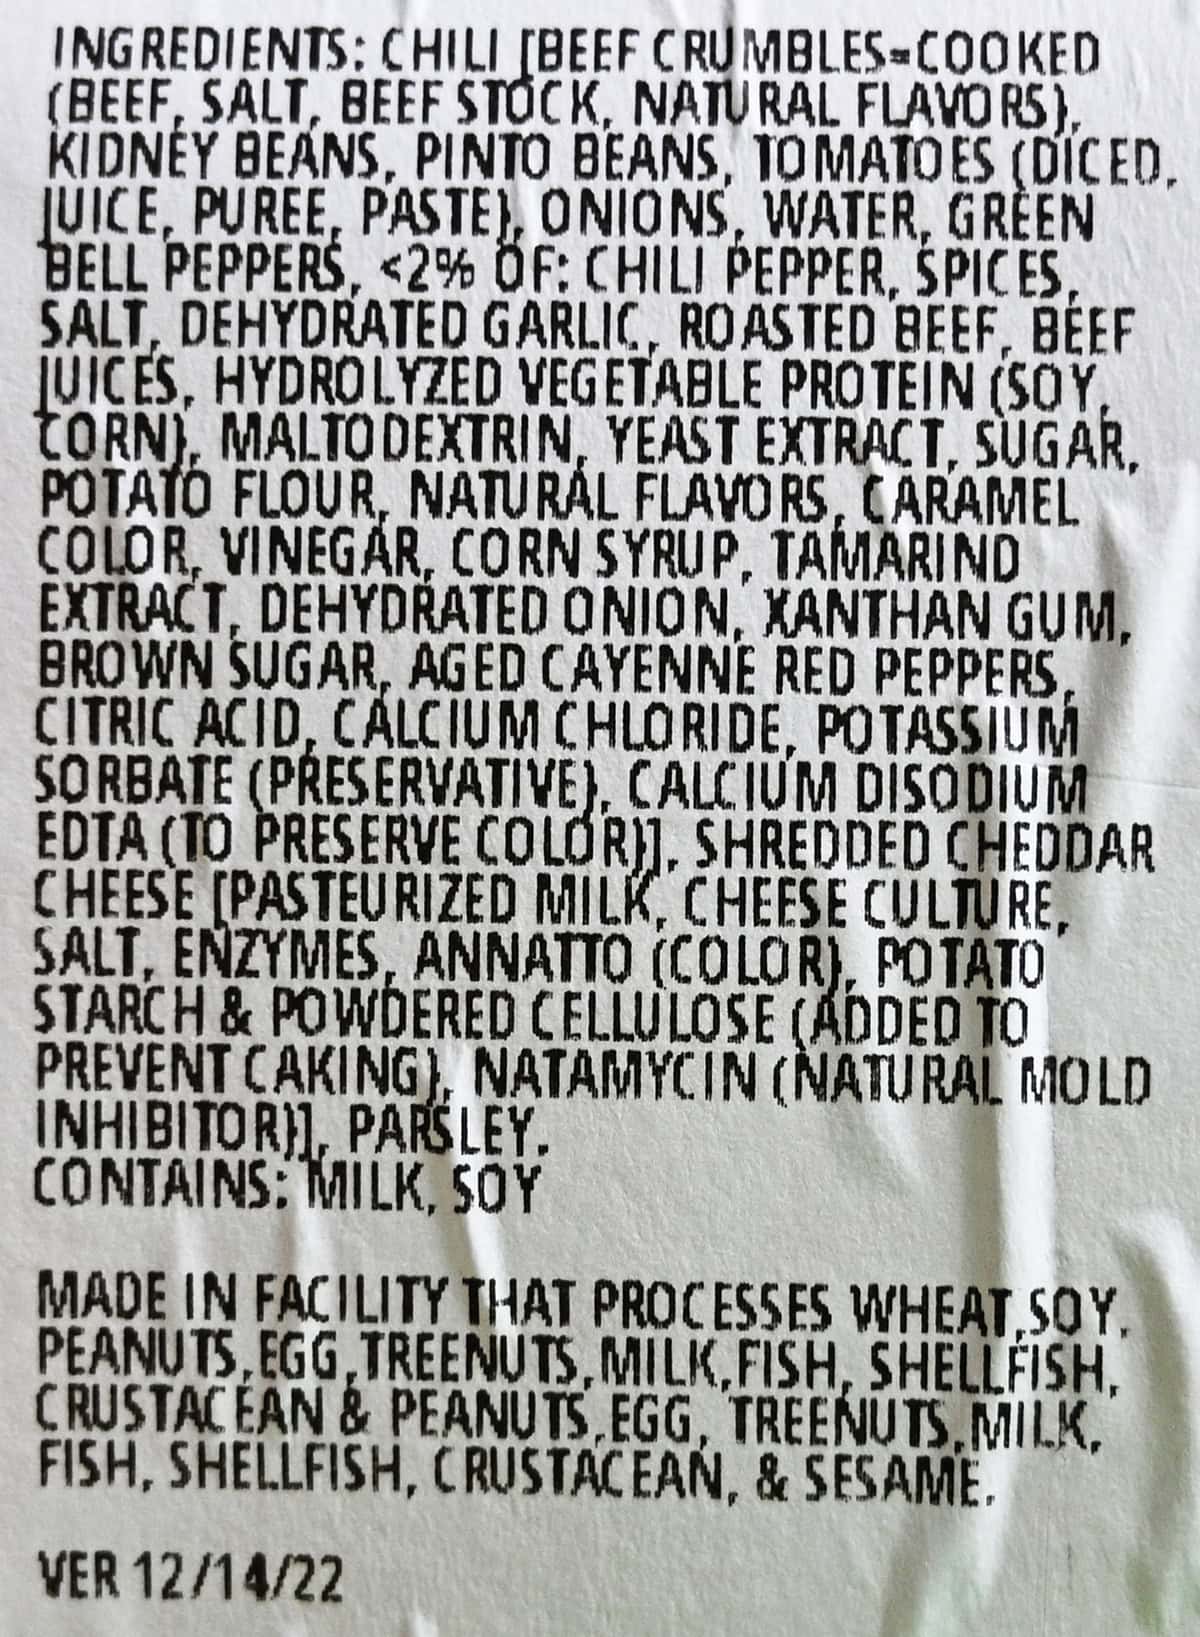 Image of the ingredients list for the chili from the packaging.